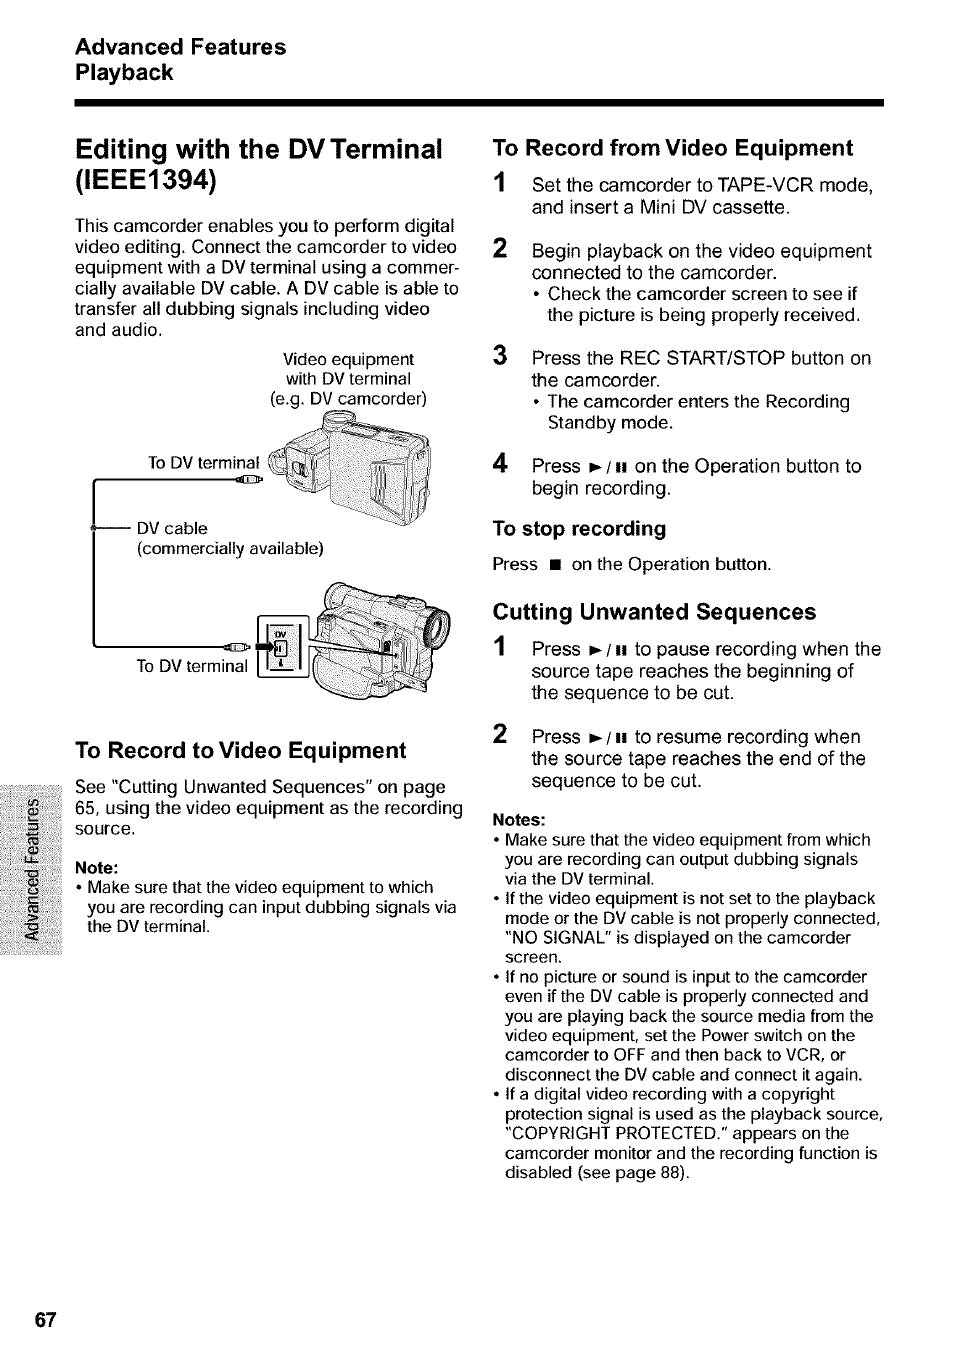 Editing with the dv terminal (ieee1394), Note, To stop recording | Notes | Sharp VIEWCAM VL-WD650U User Manual | Page 82 / 120